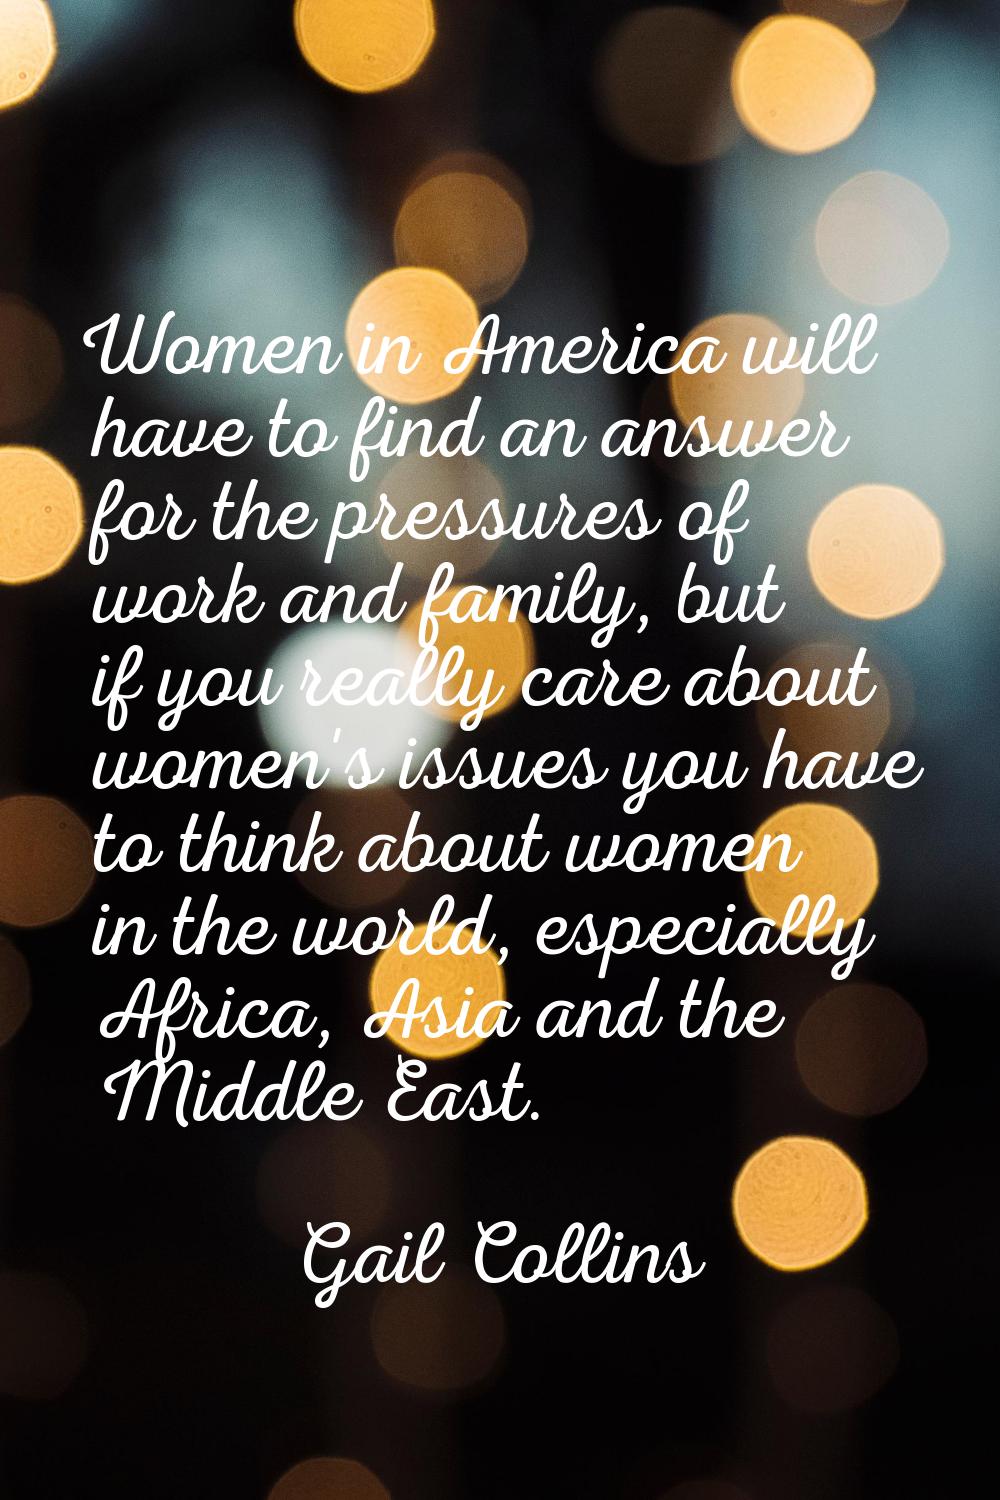 Women in America will have to find an answer for the pressures of work and family, but if you reall